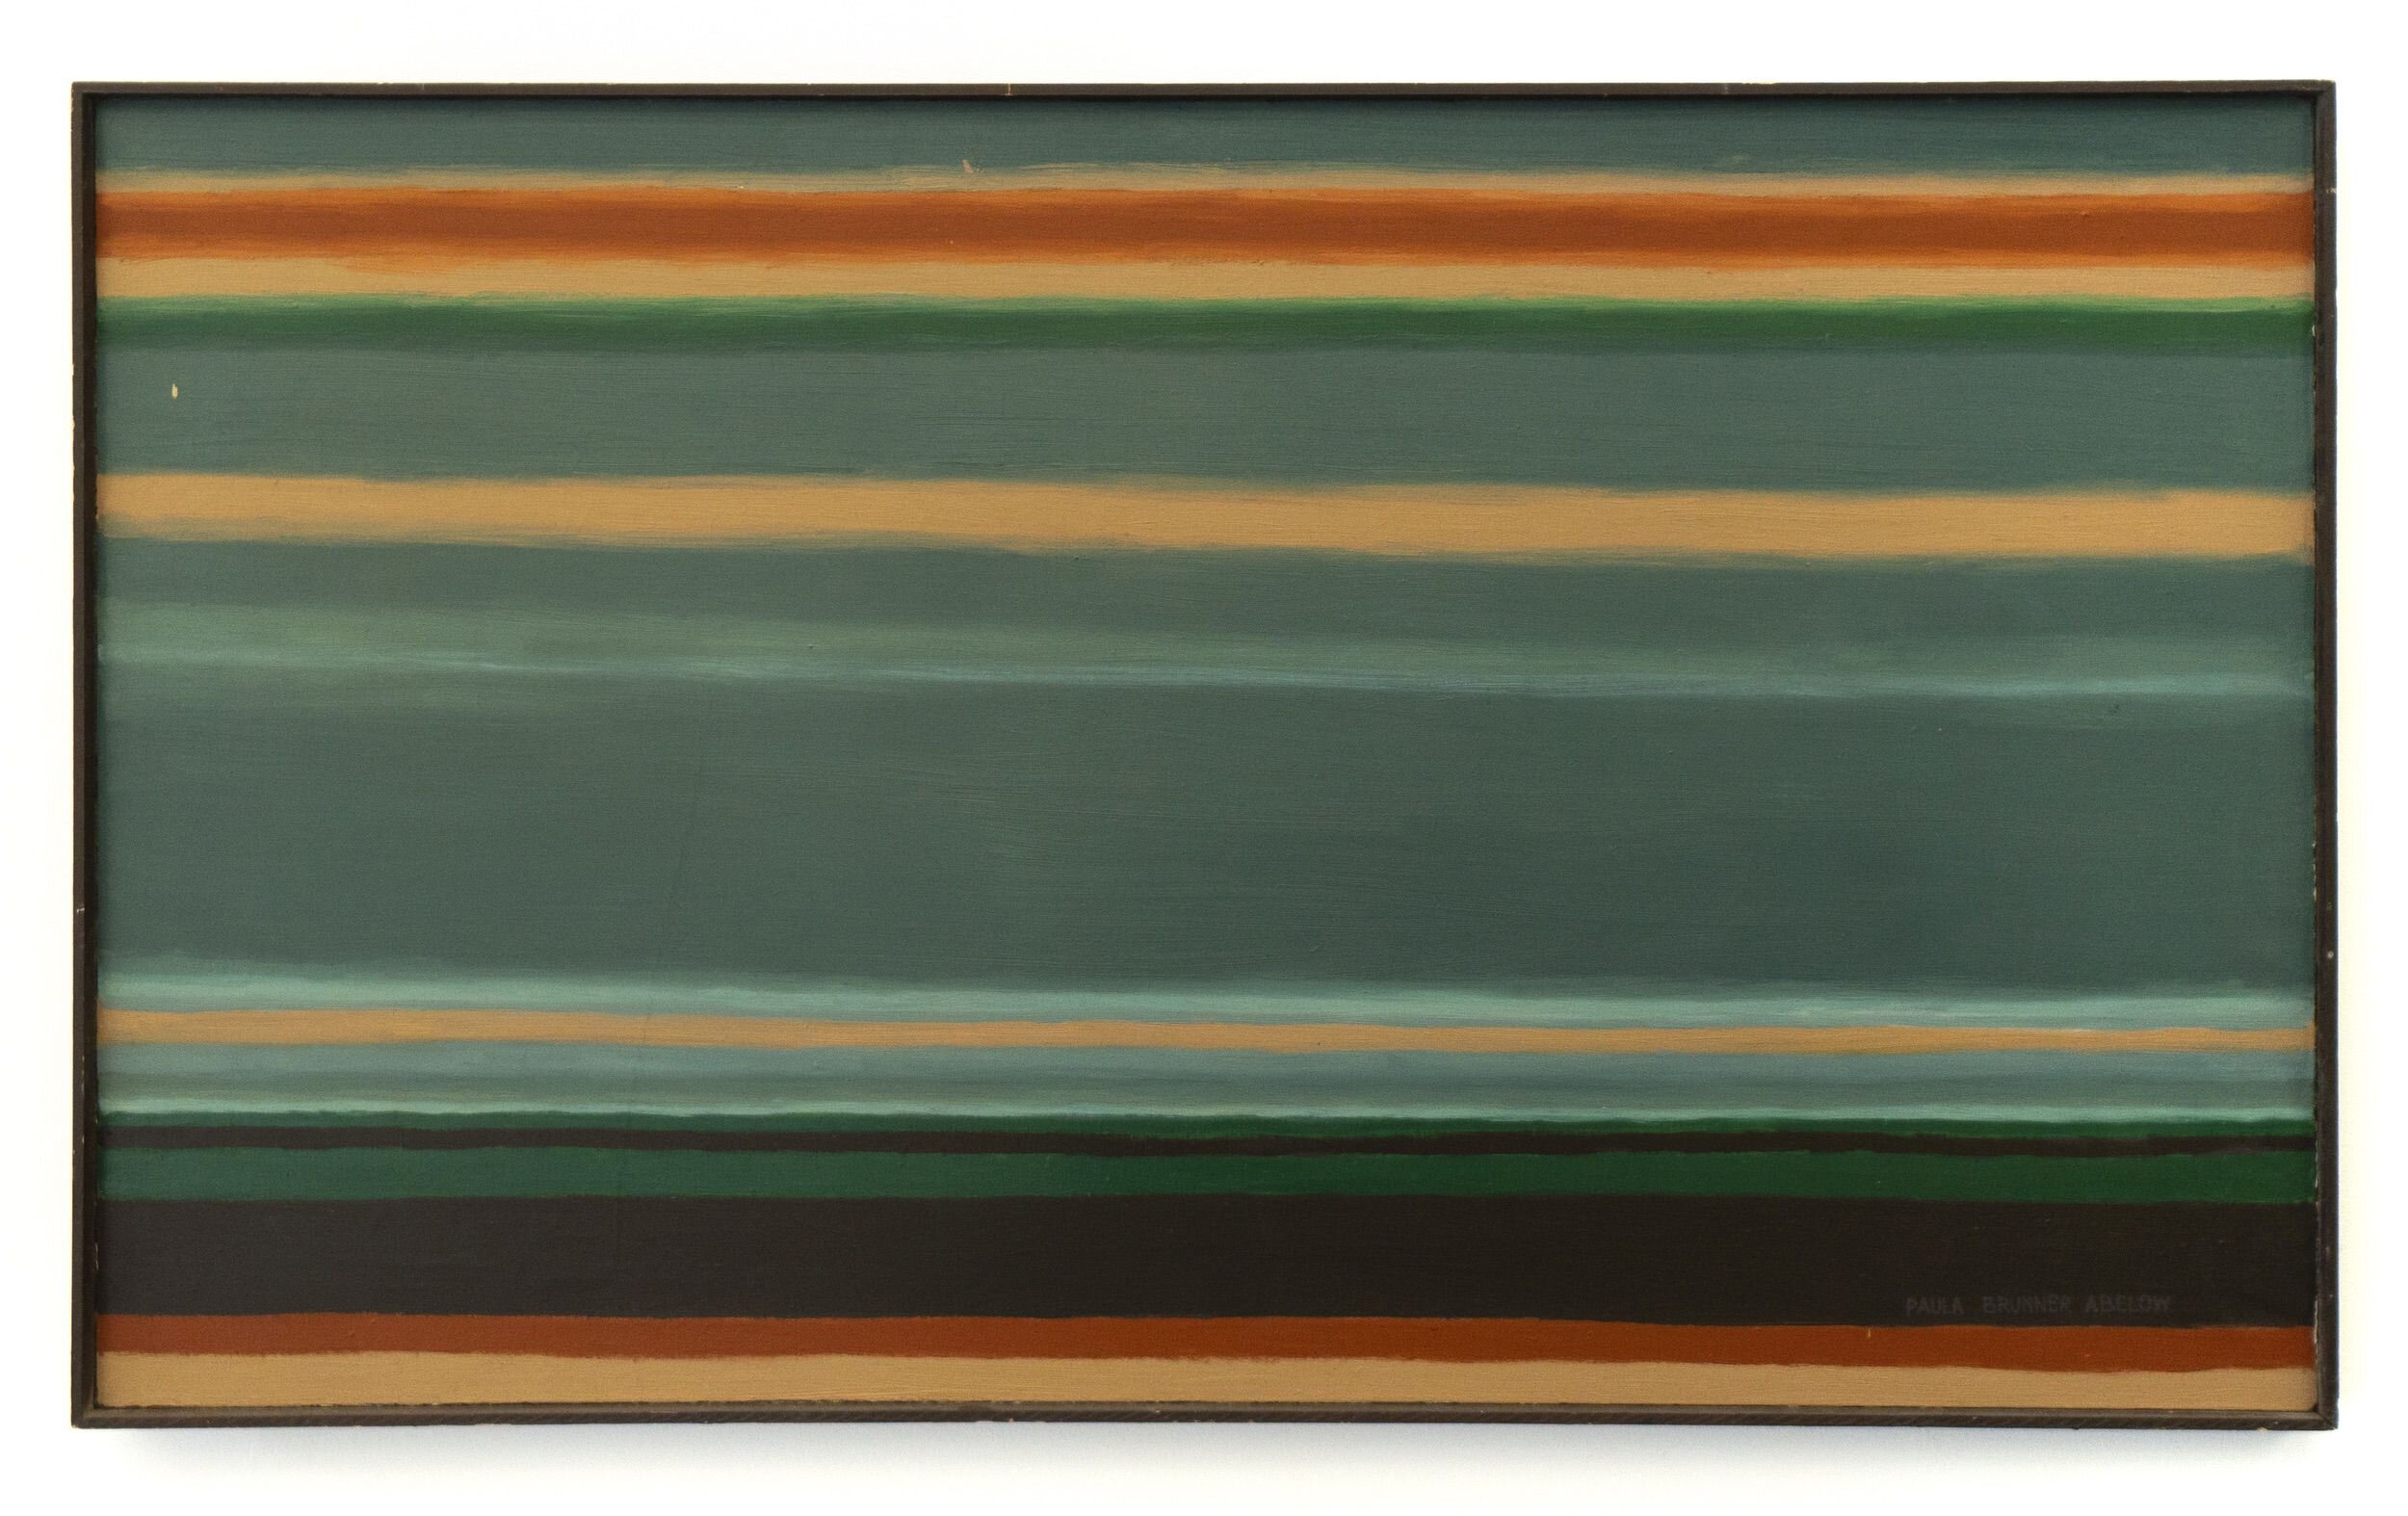  Paula Brunner Abelow  No title , 1968 Oil on canvas with artist’s frame 26.5 x 44.5 inches 